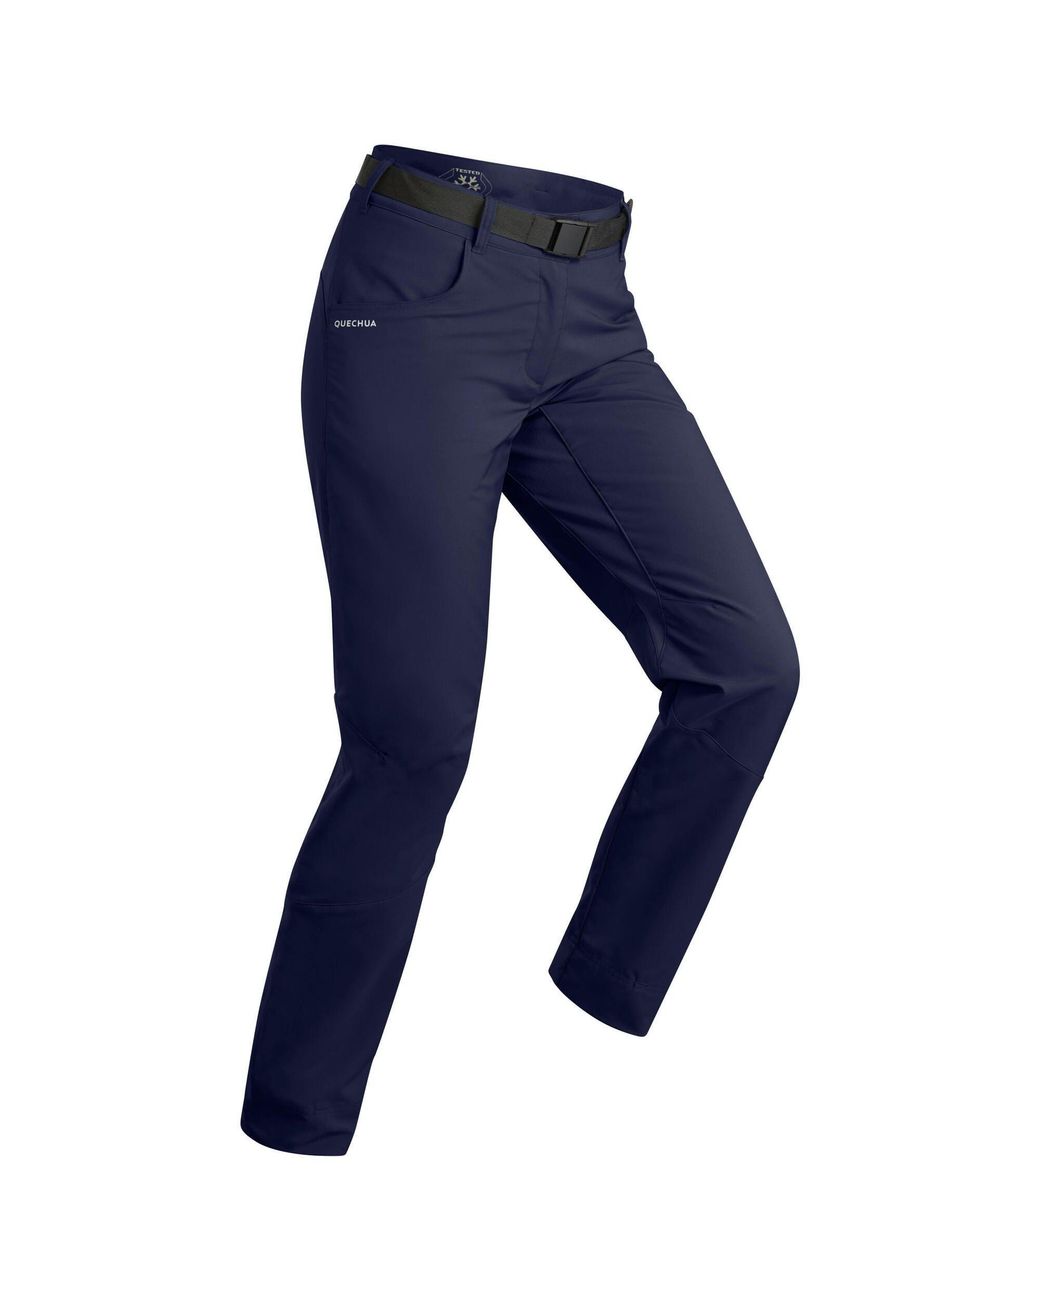 Quechua Decathlon Hiking Warm Water-repellent Trousers - Sh500 in